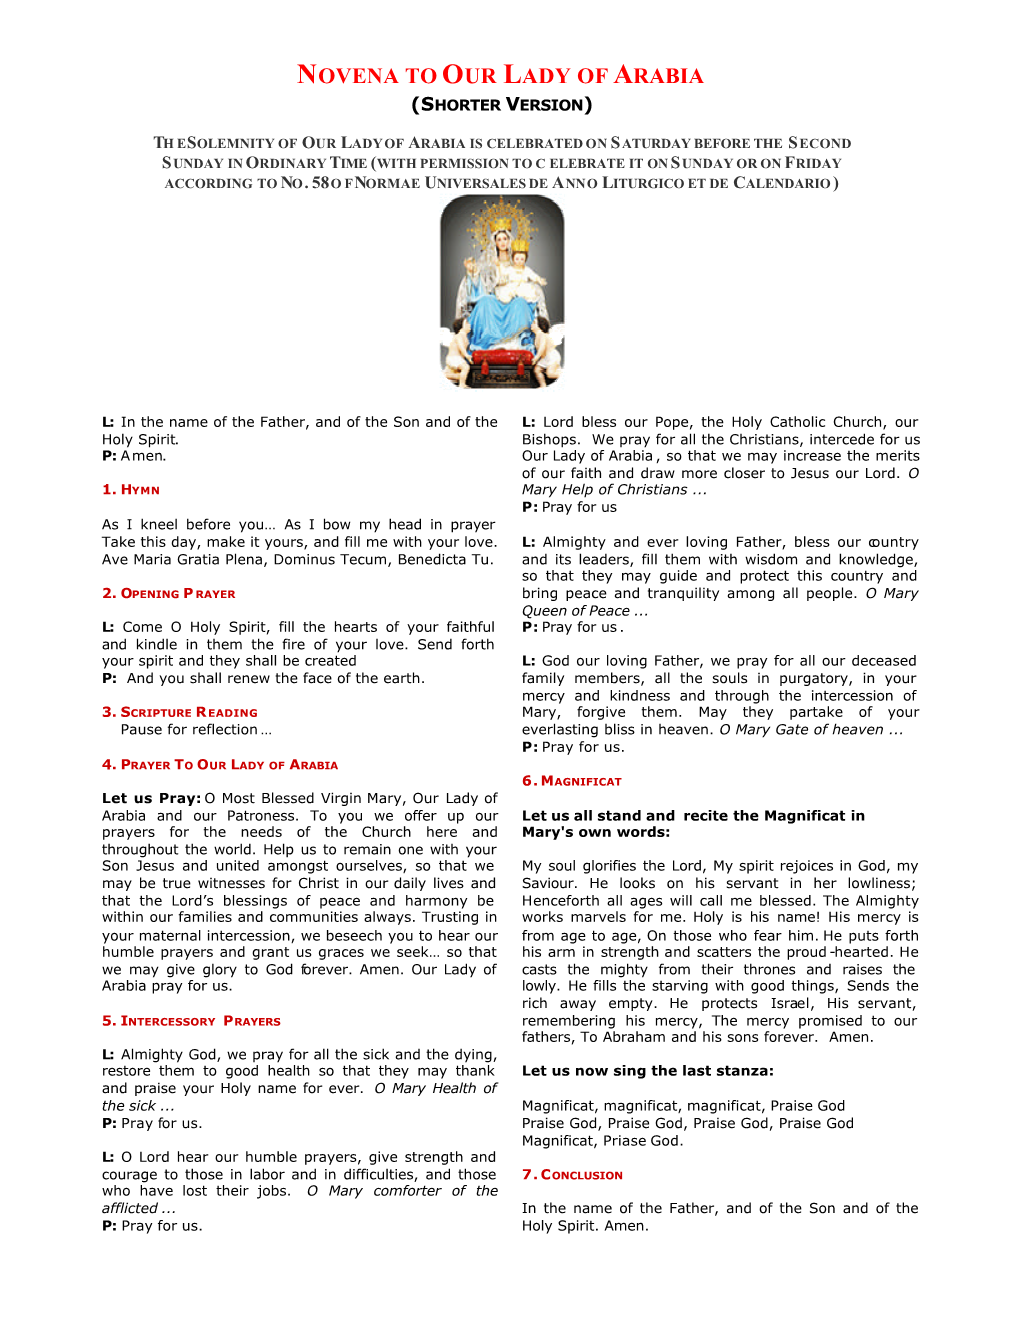 Novena to Our Lady of Arabia (Shorter Version)